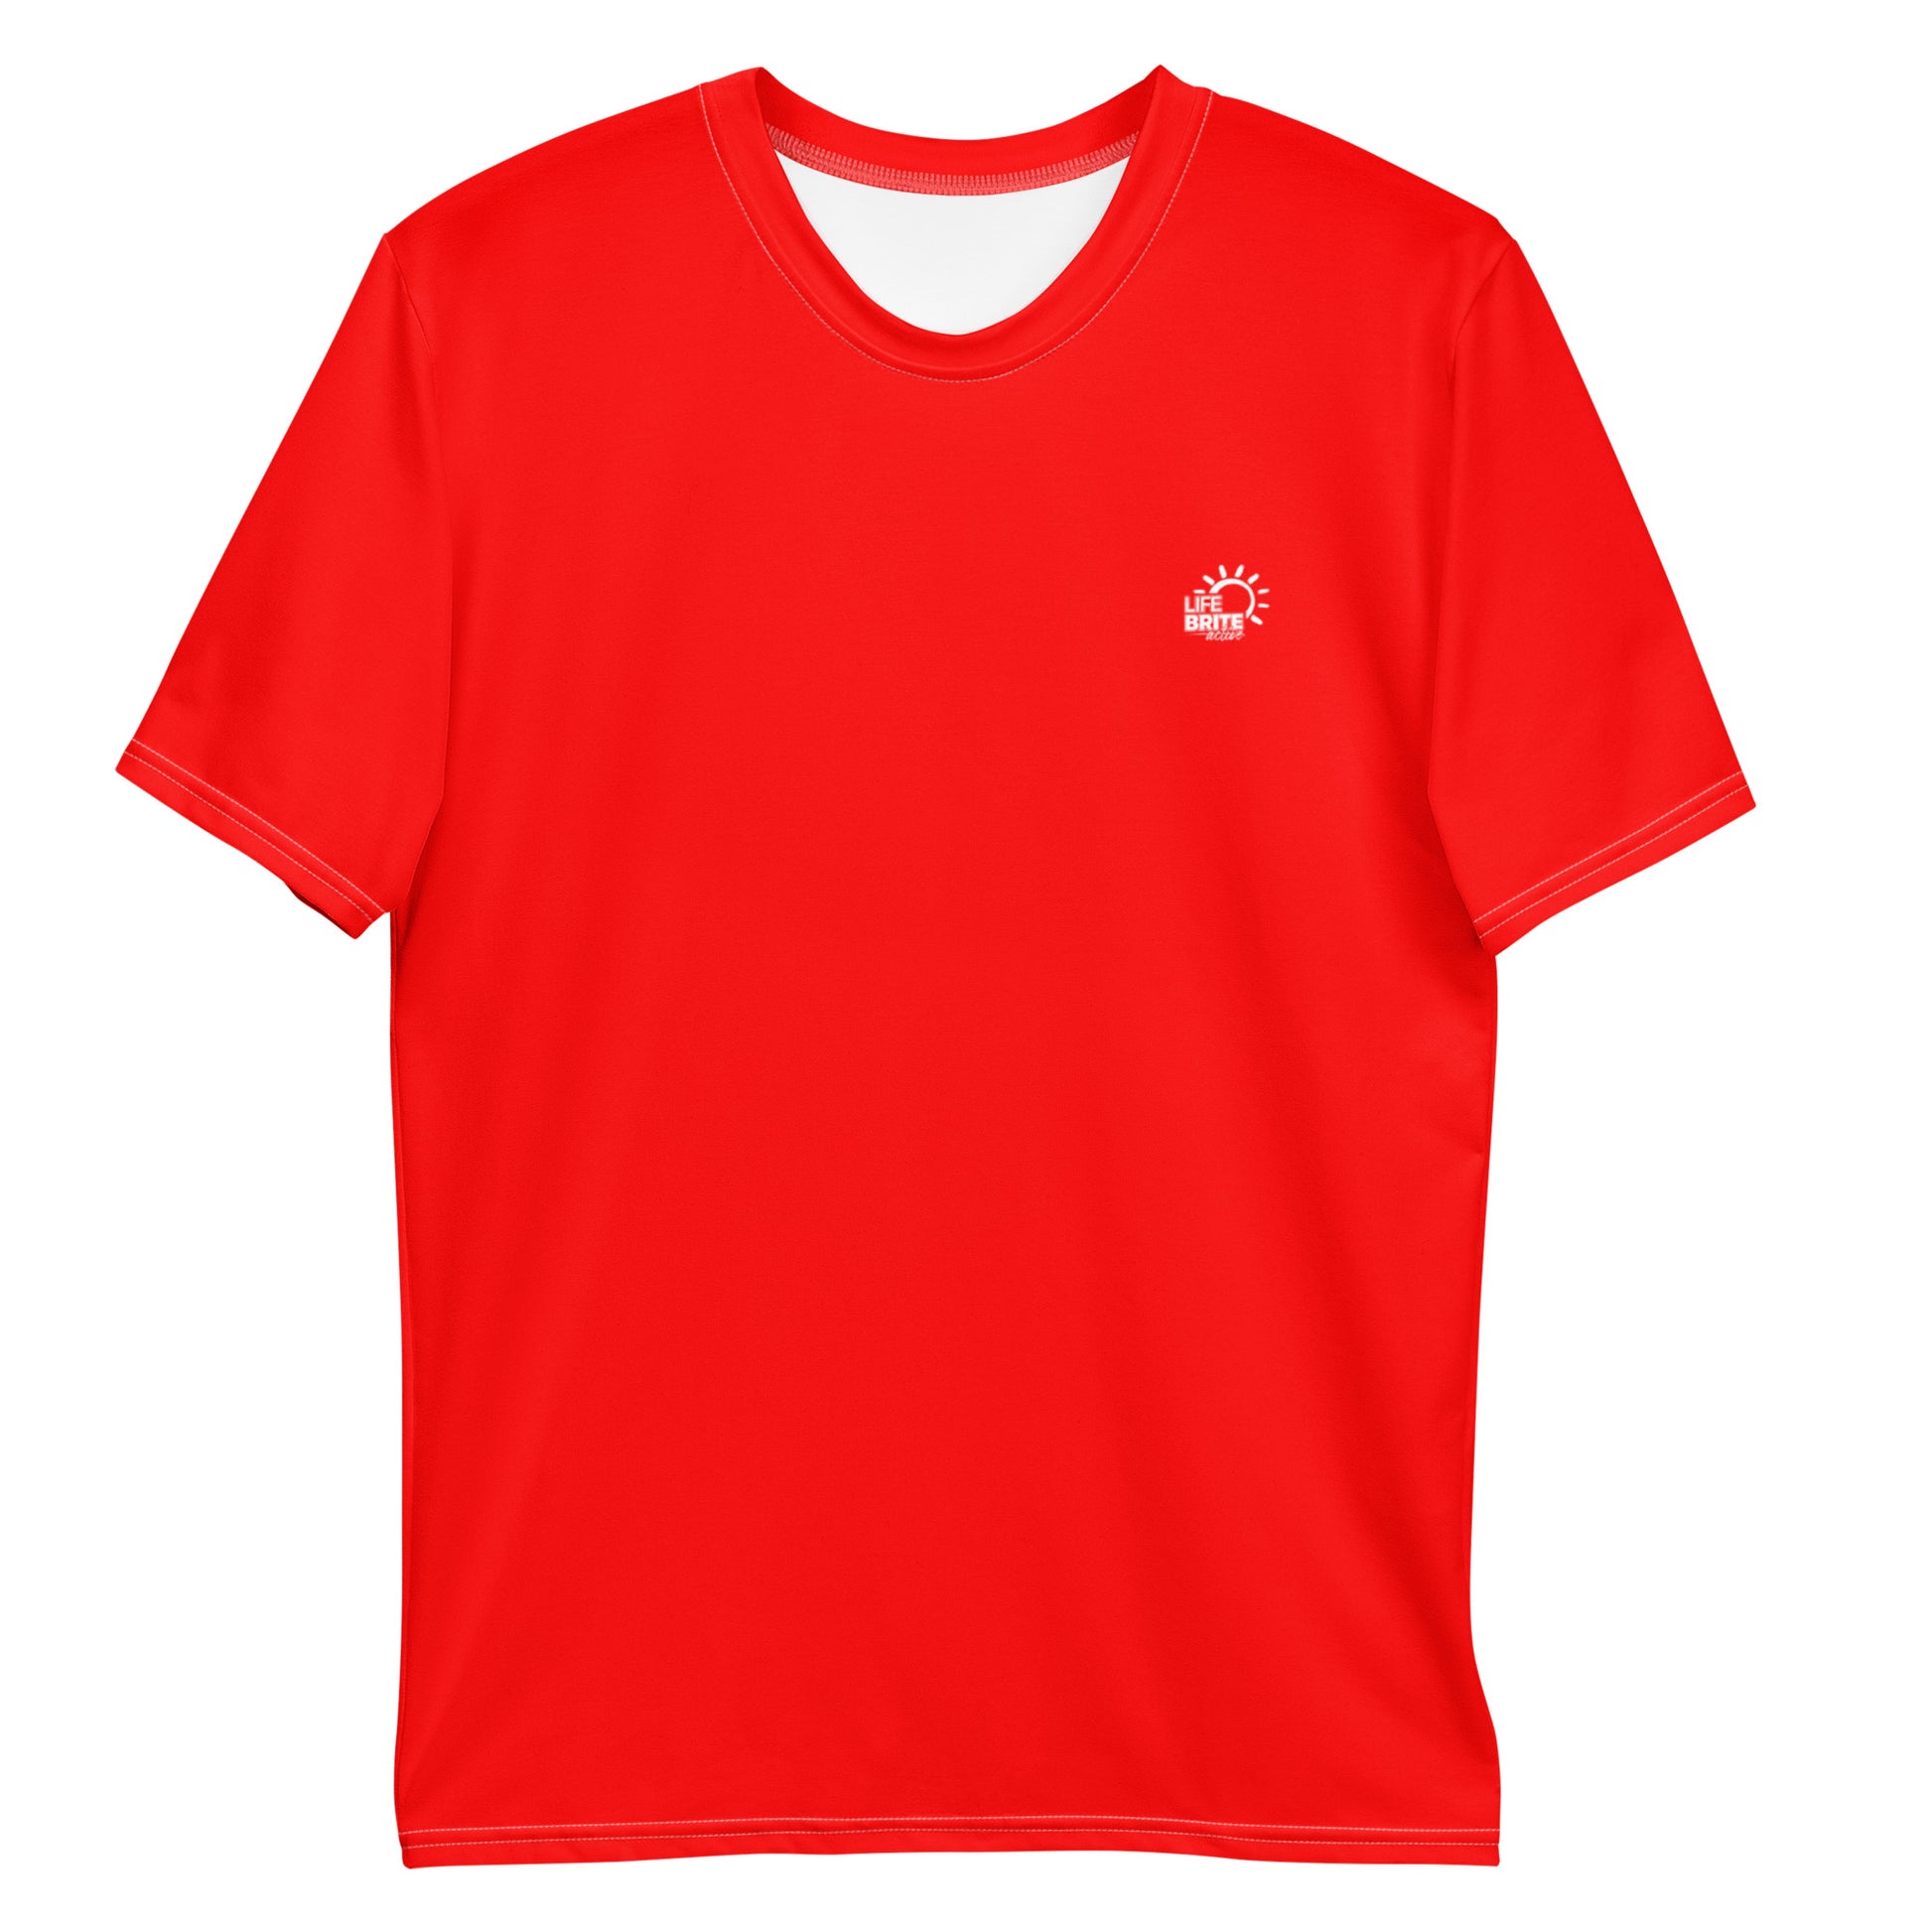 Primary Men's Athletic T-shirt - Radiant Red – LifeBrite Active